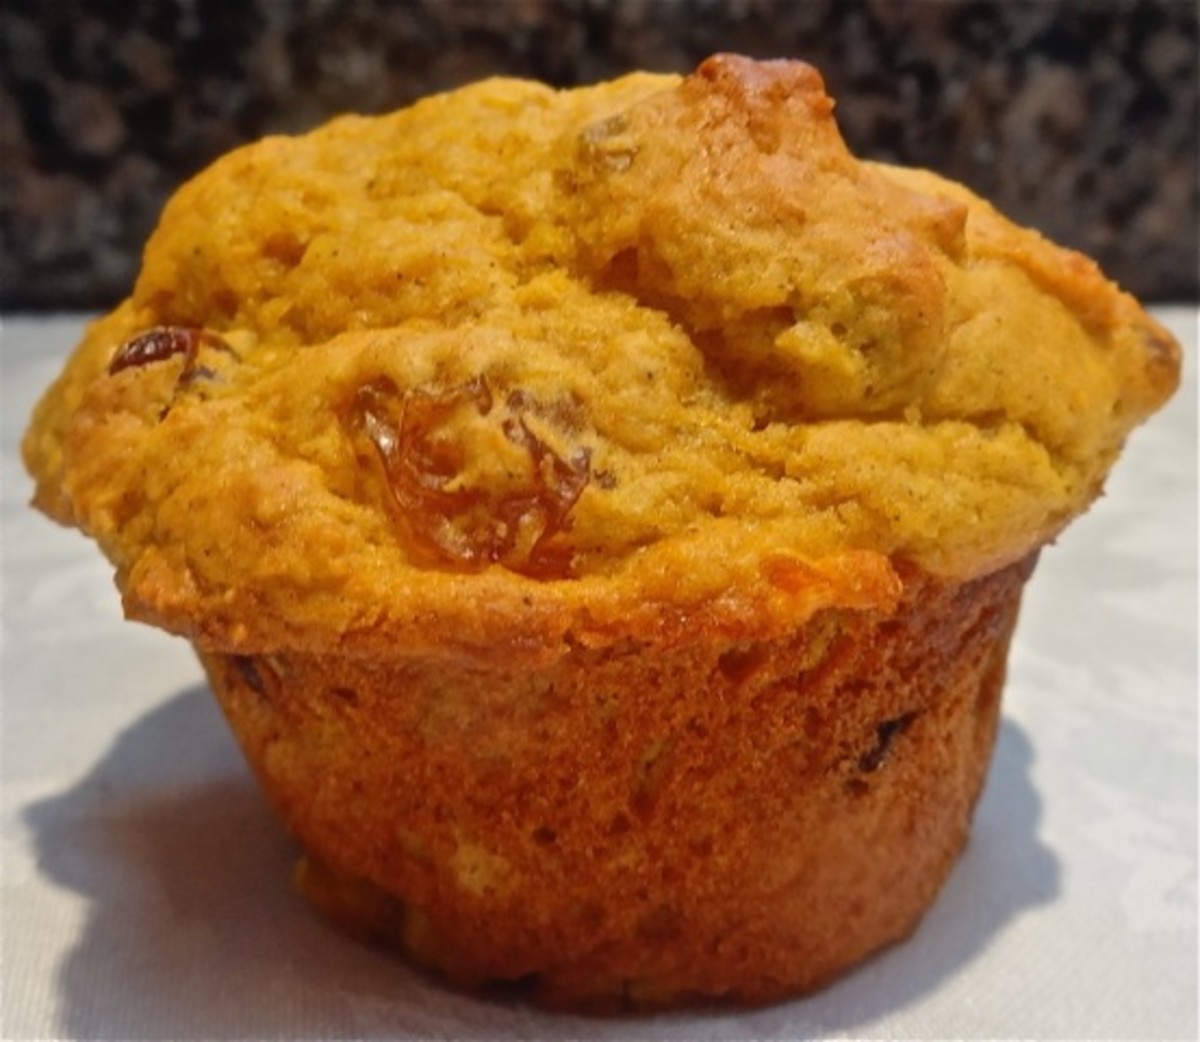 Squash (or carrot) Muffins